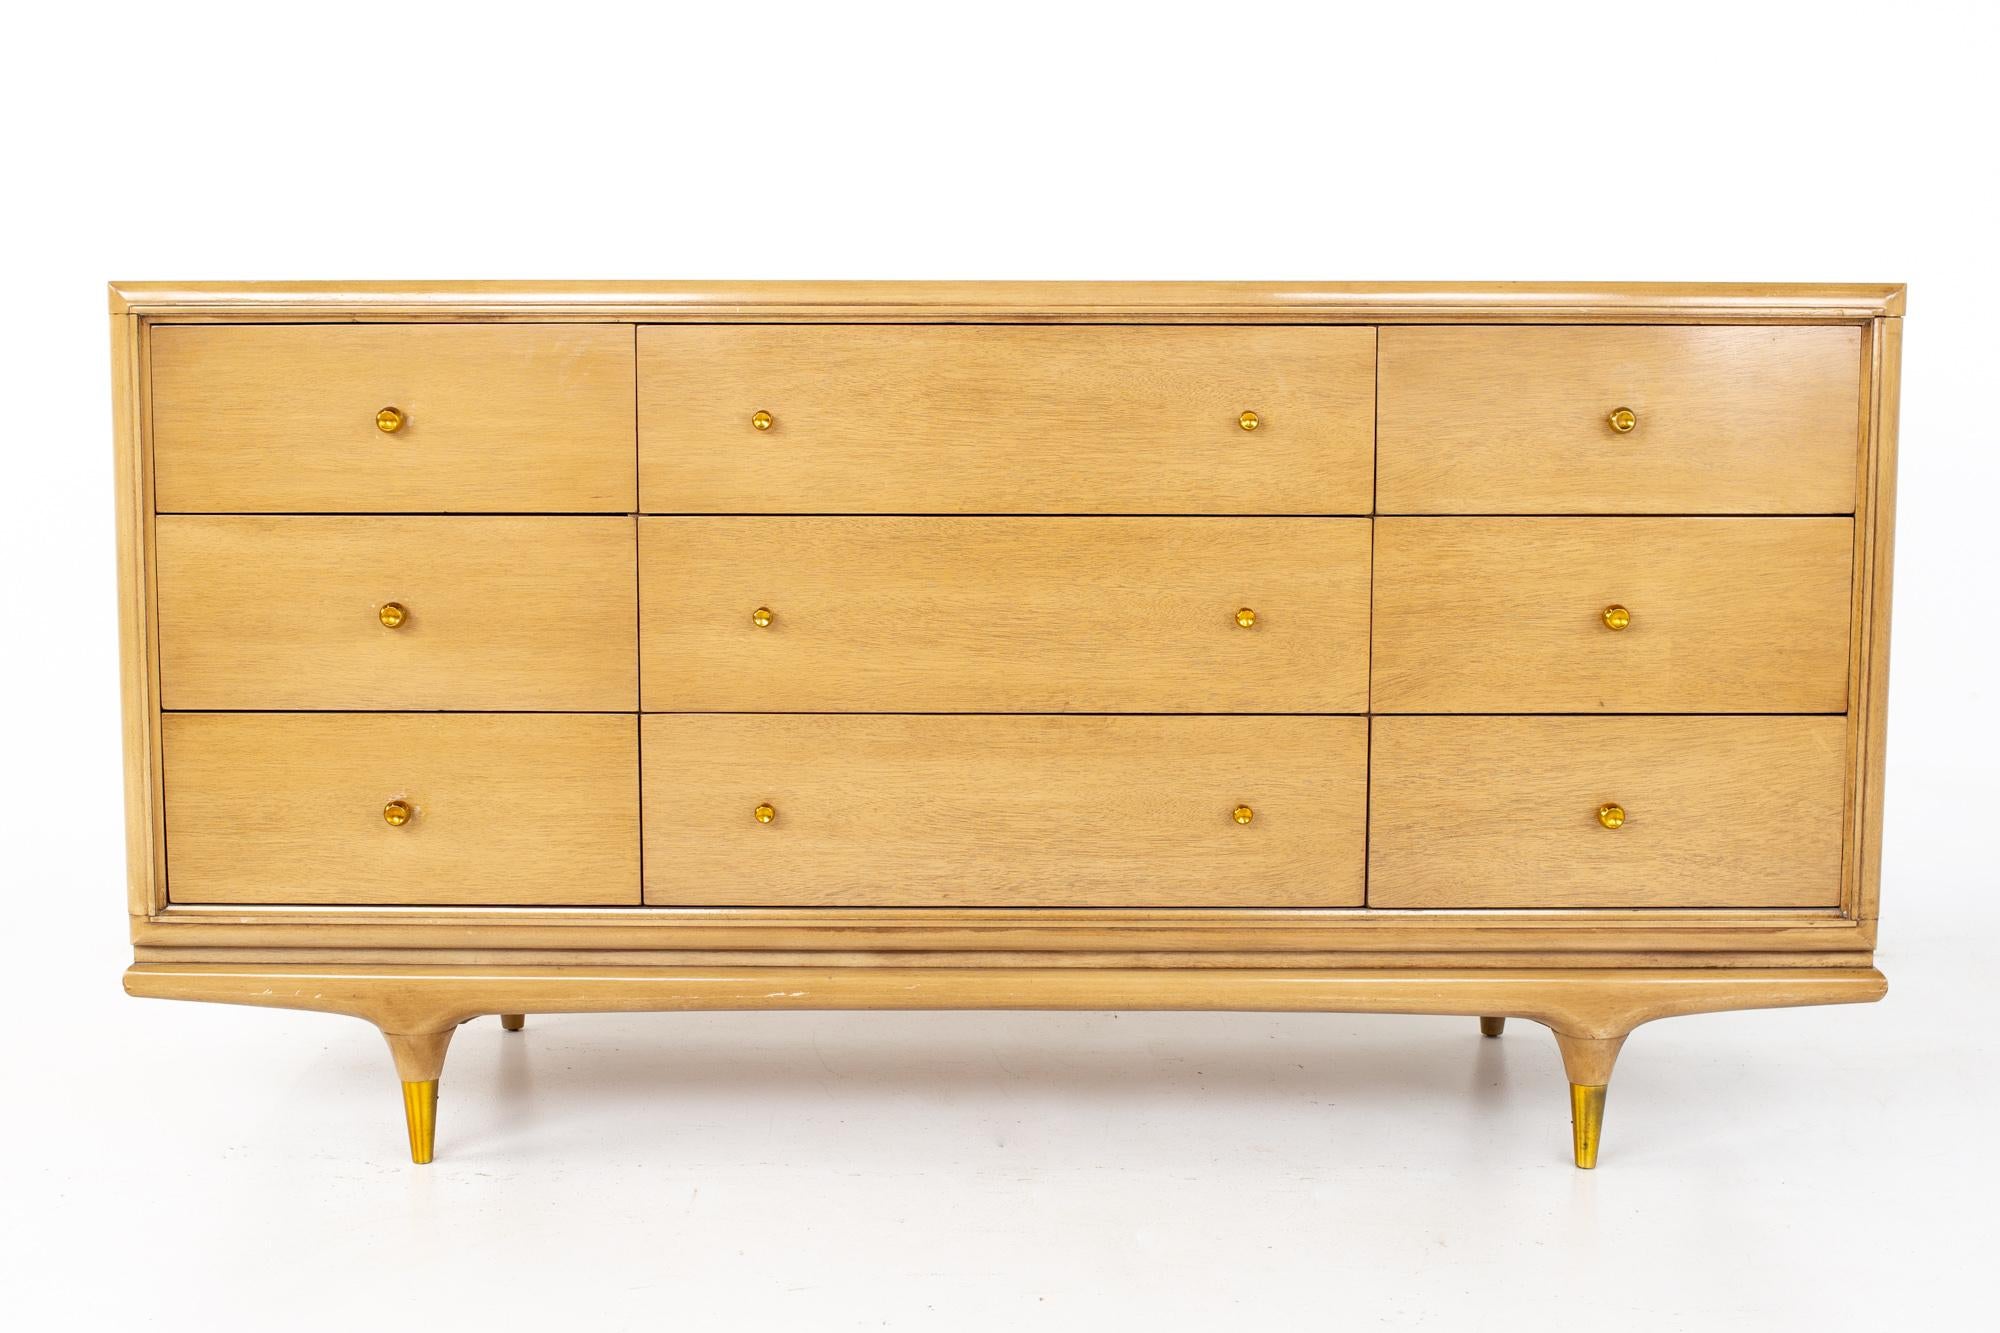 Kent Coffey Continental mid century walnut and brass 9 drawer lowboy dresser

Dresser measures: 64 wide x 21 deep x 33 inches high

All pieces of furniture can be had in what we call restored vintage condition. That means the piece is restored upon